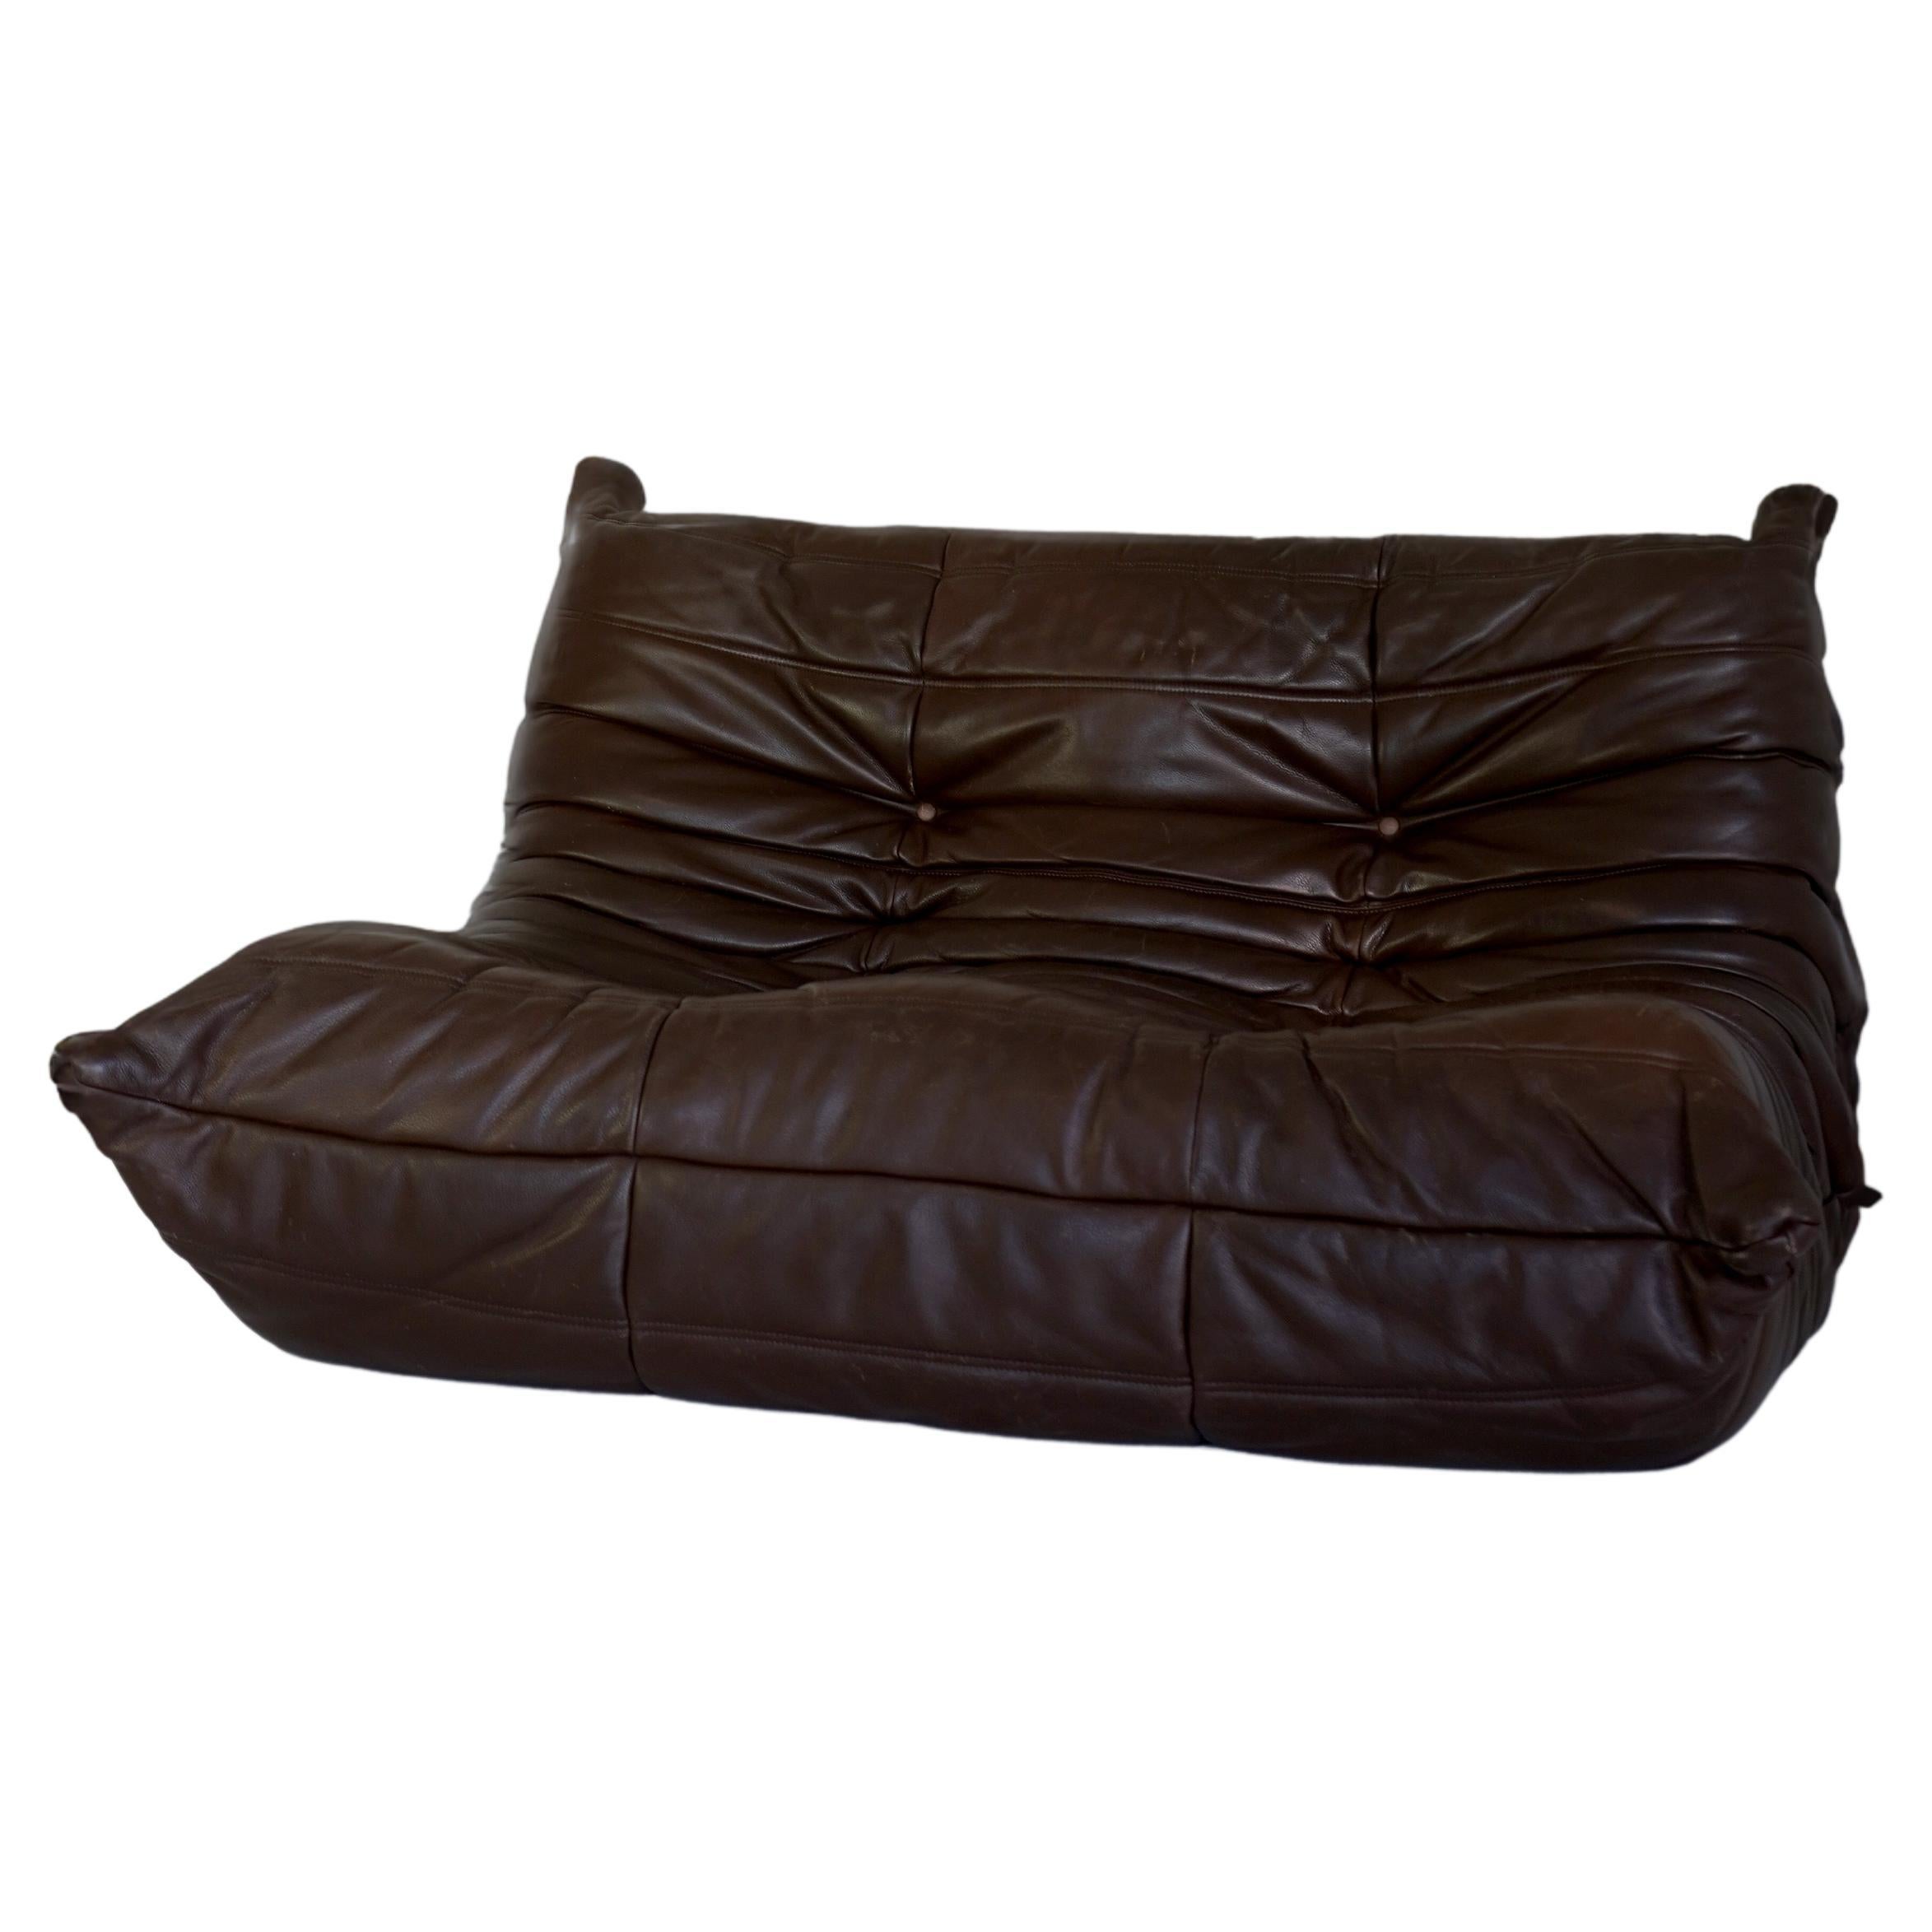 Iconic vintage Togo sofa in brown leather by bohemian French designer Michel Ducaroy. Designed in 1973 and inspired by a scrunched and folded tube of toothpaste. Triple-density polyurethane foam with no internal frame. Tagged Ligne Roset.

Chocolate